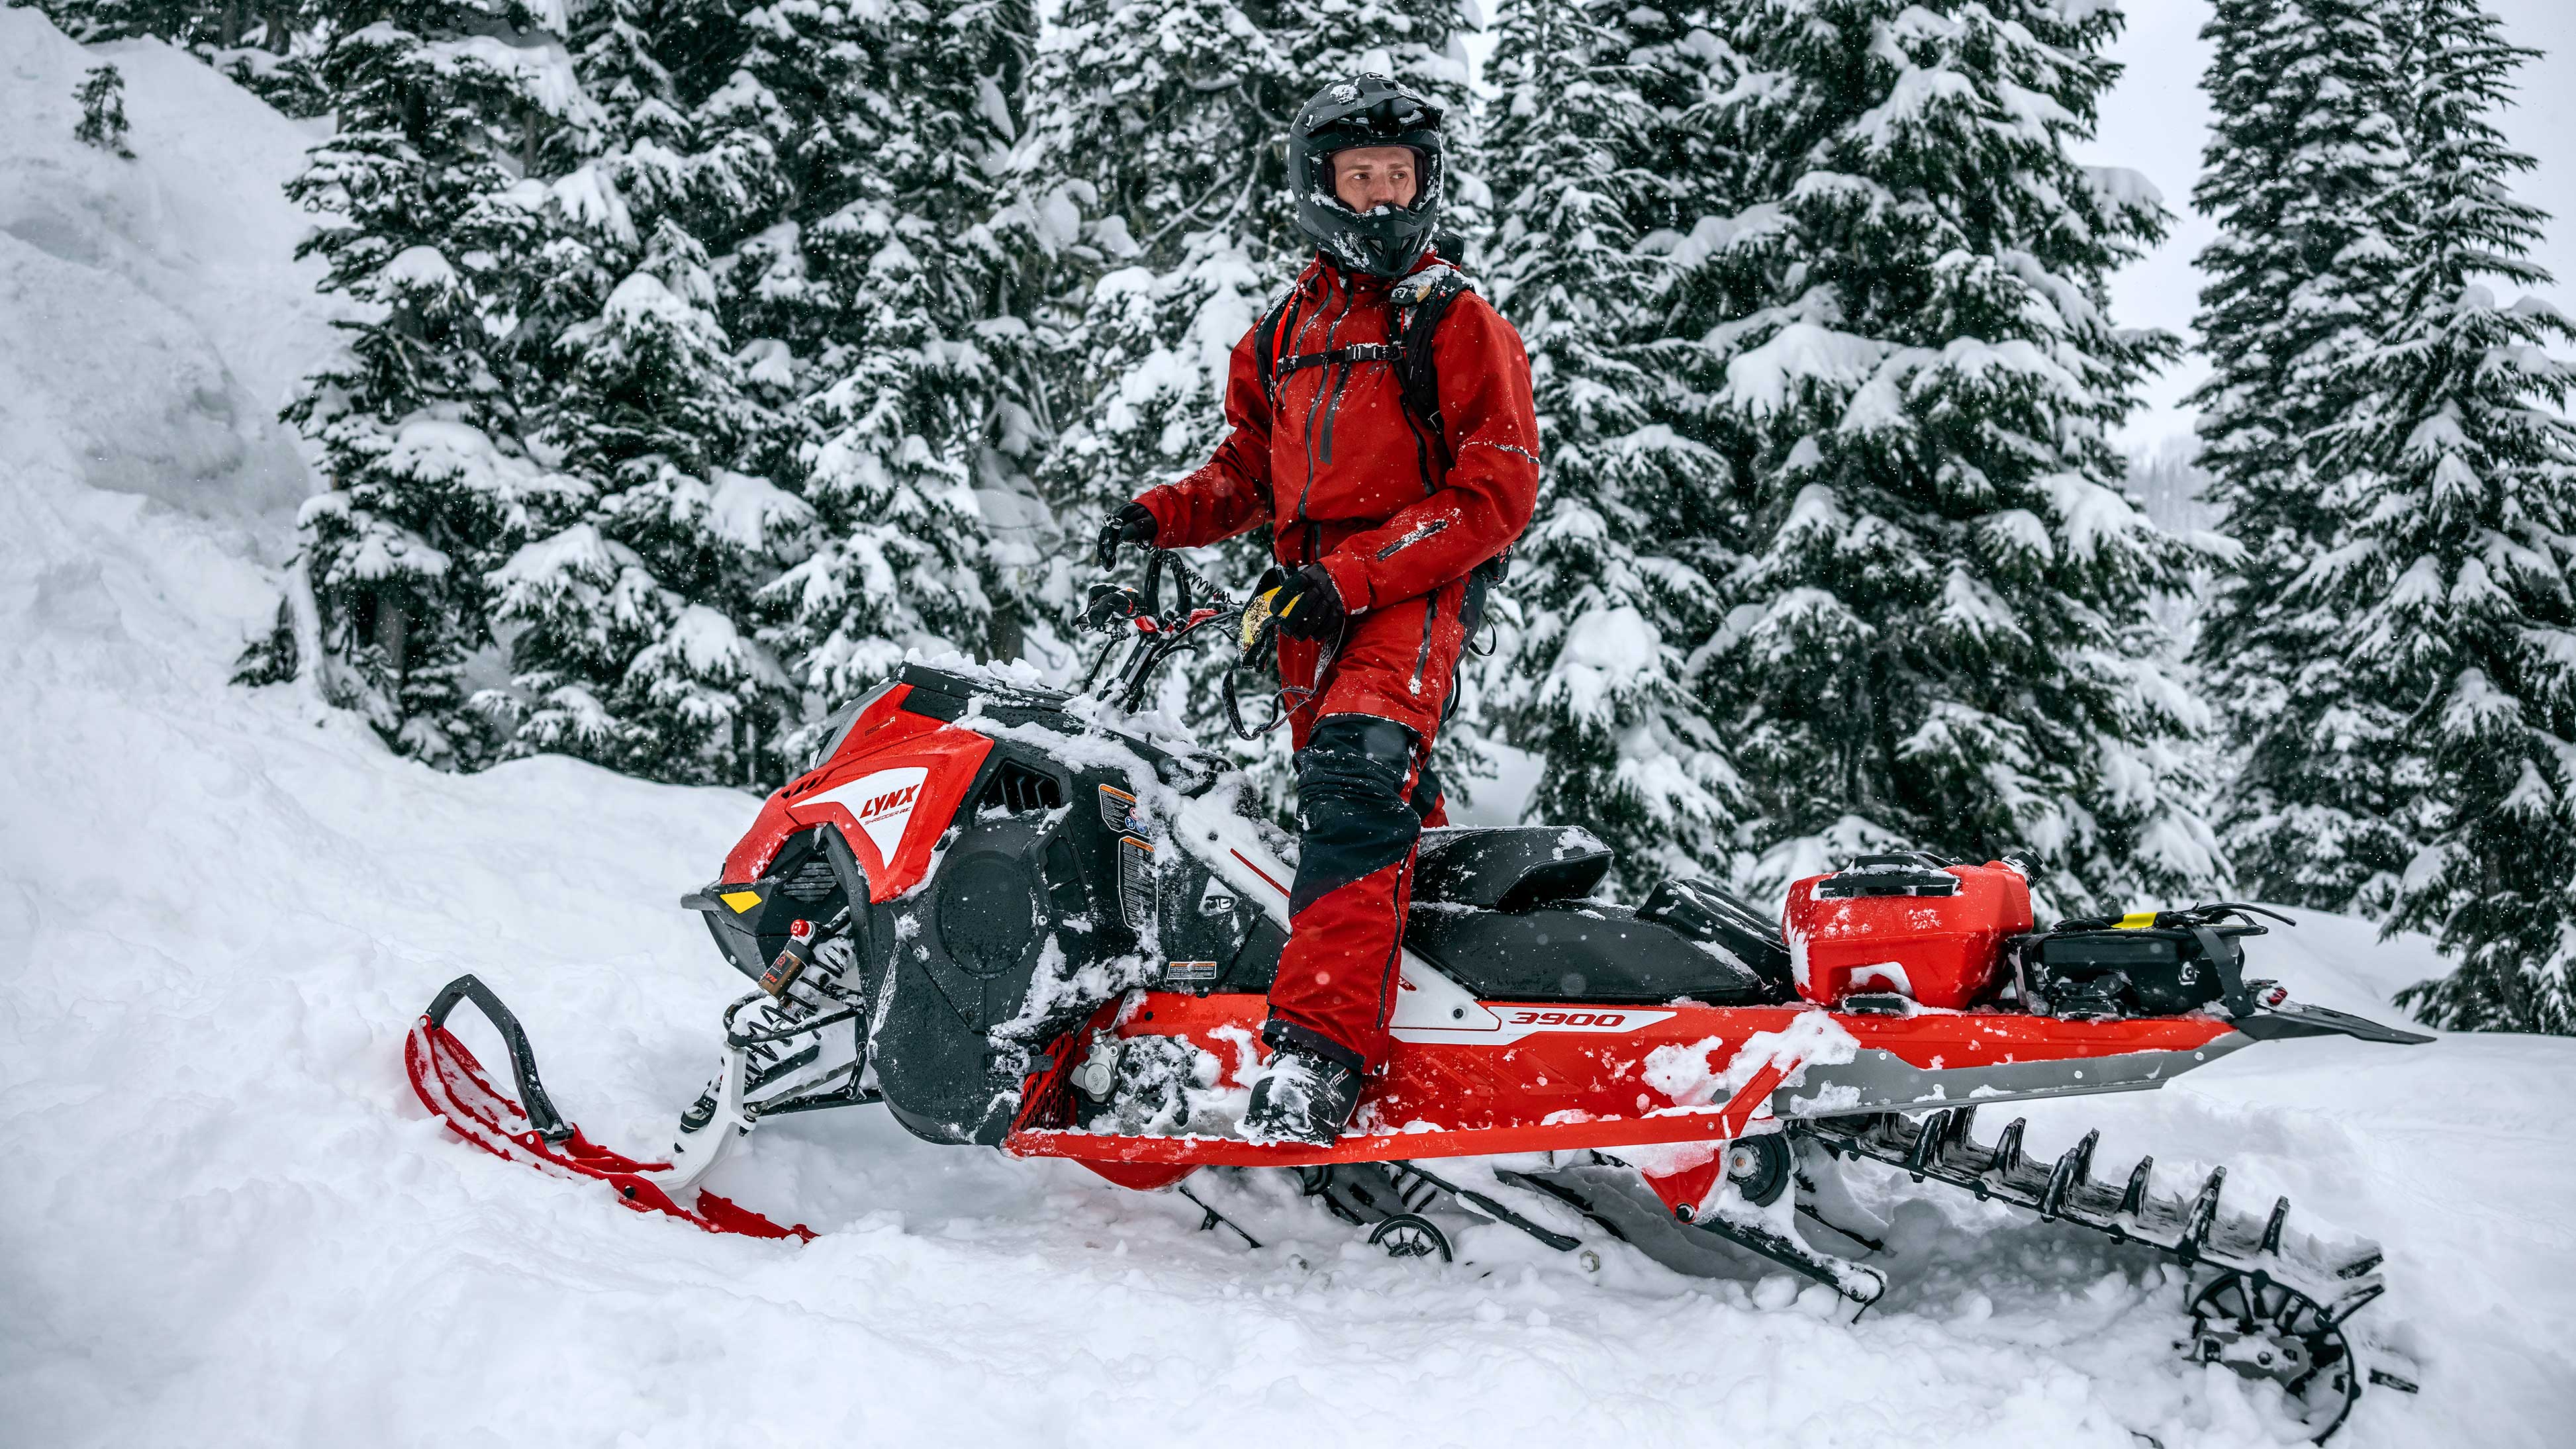 Rider standing on their fully equipped Lynx snowmobile looking around